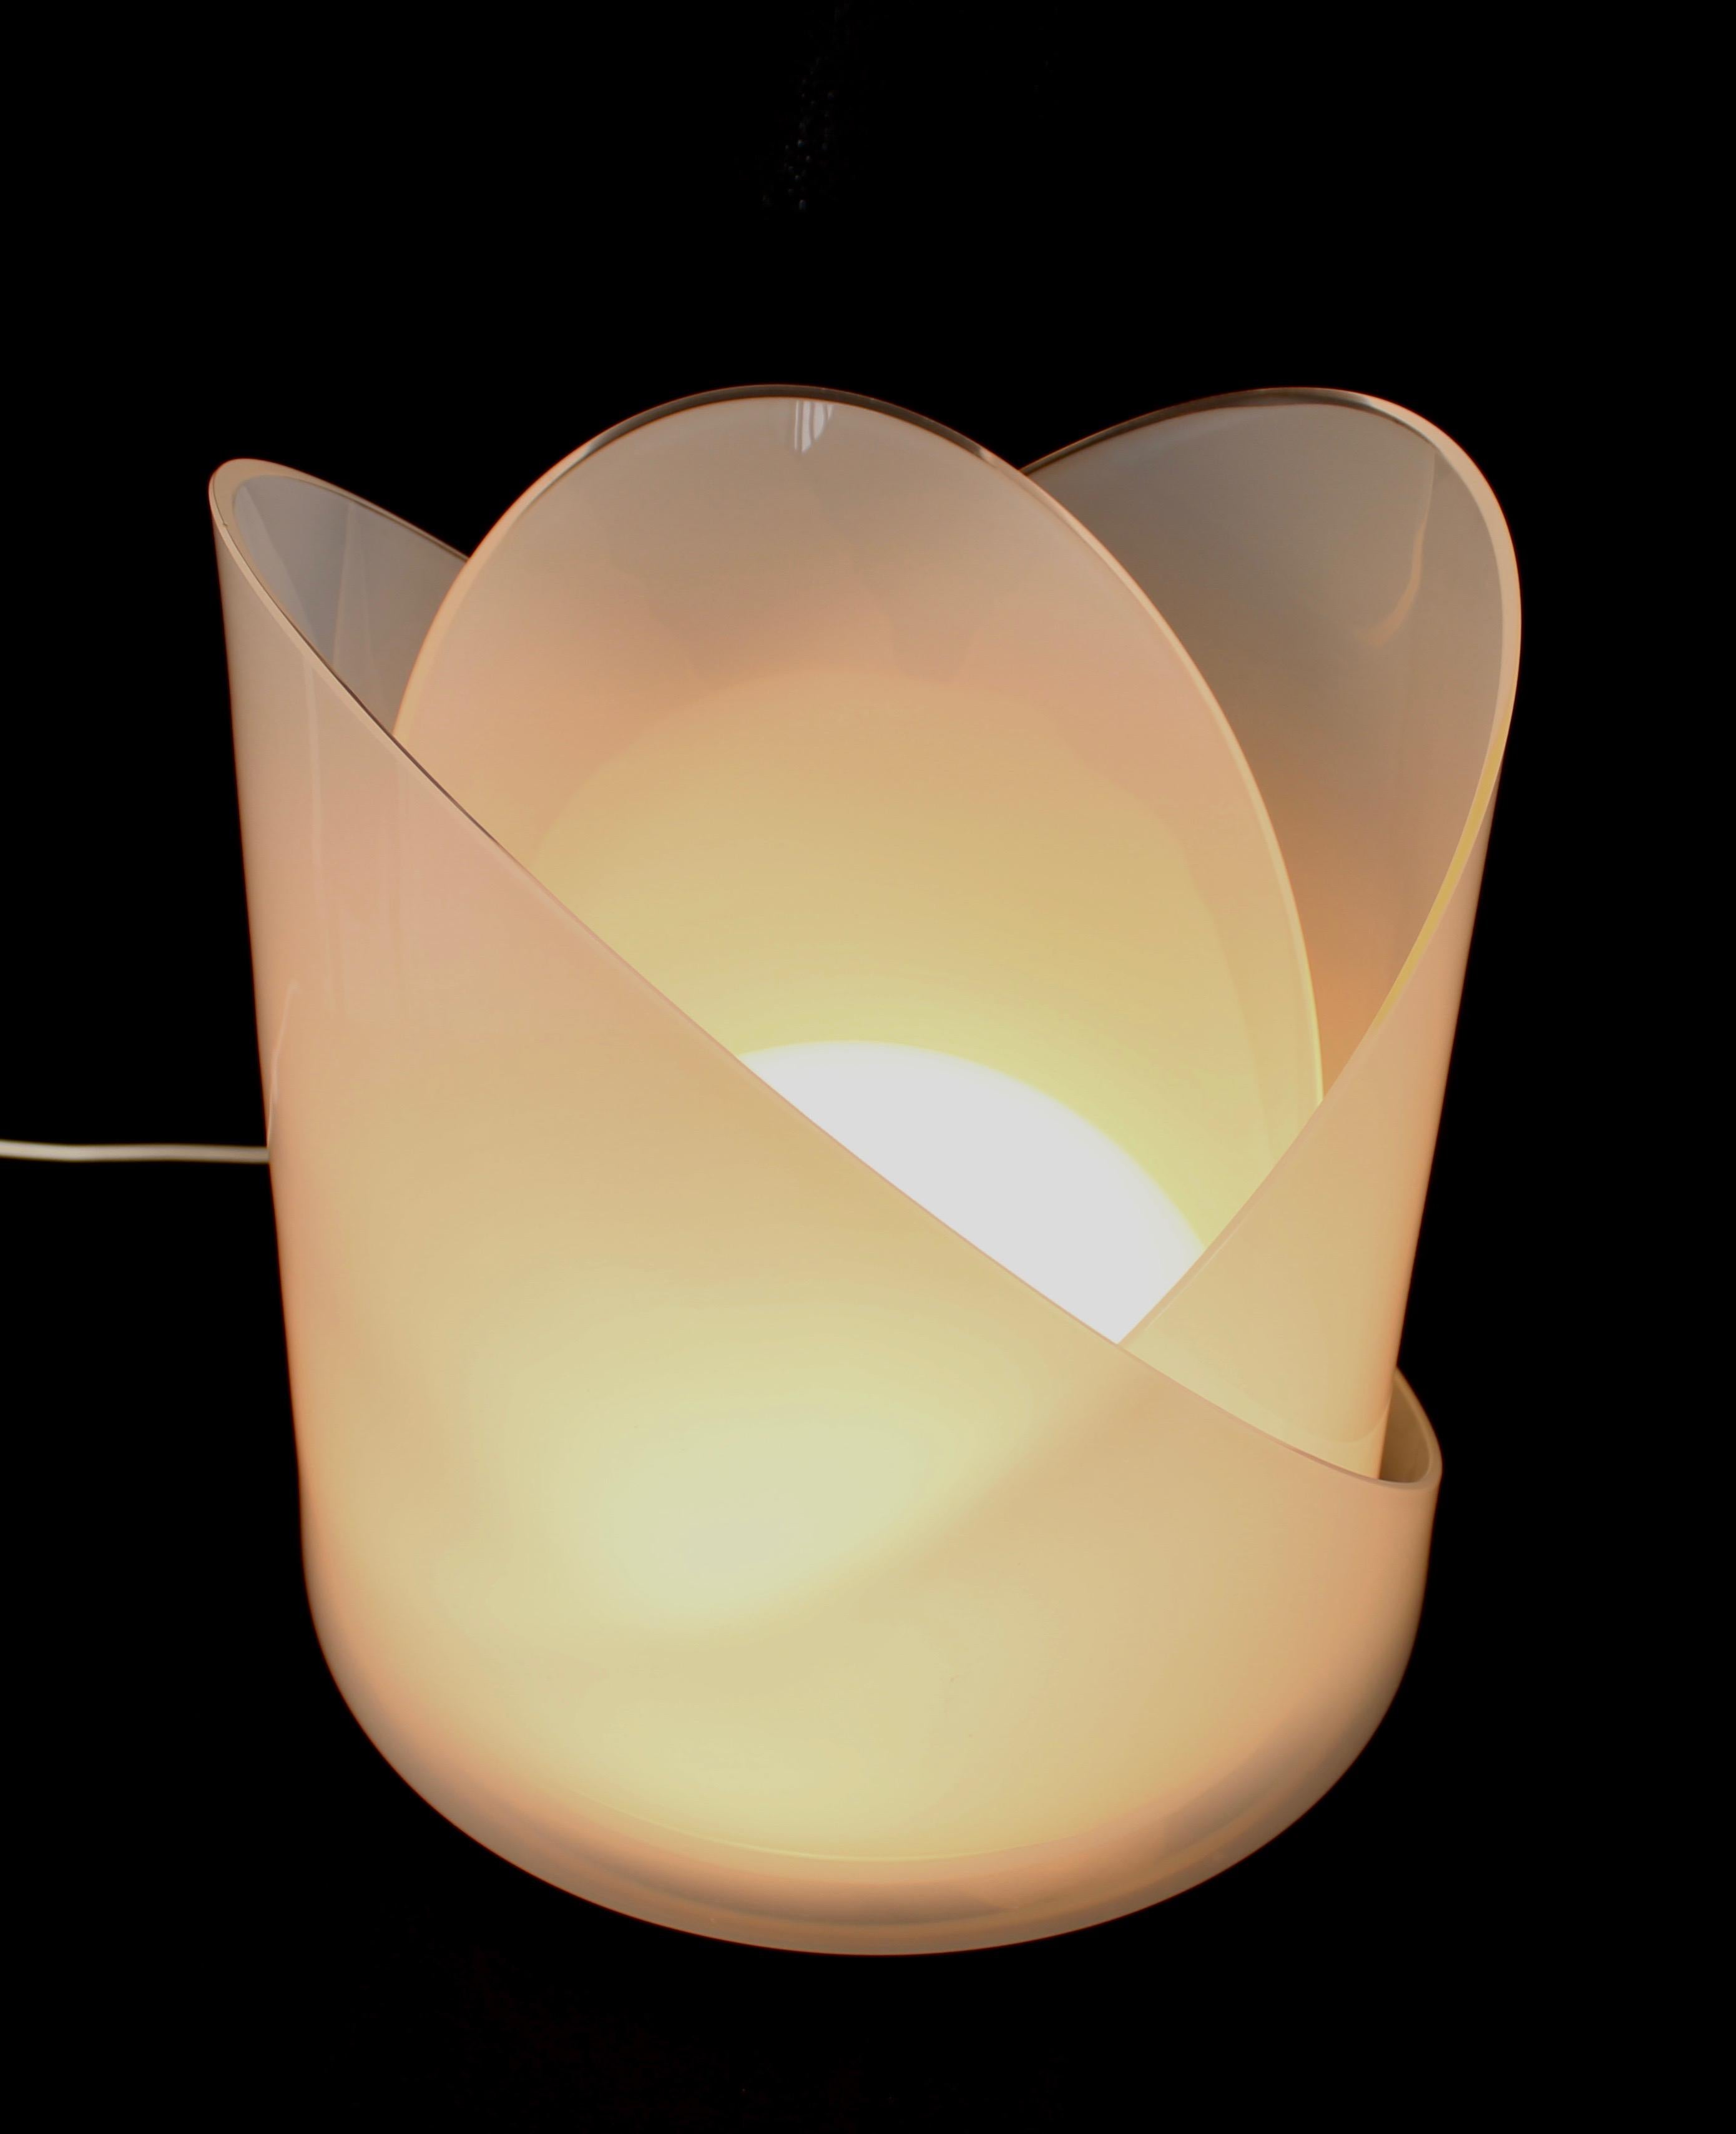 Carlo Nason Model LT300 Modulable Italian opaque sculptural glass table lamp for Mazzega.
Sometimes this lamp is called the lotus lamp and is composed of 3 opaque glass pieces or leaves that rotate around the center globe and can be positioned as